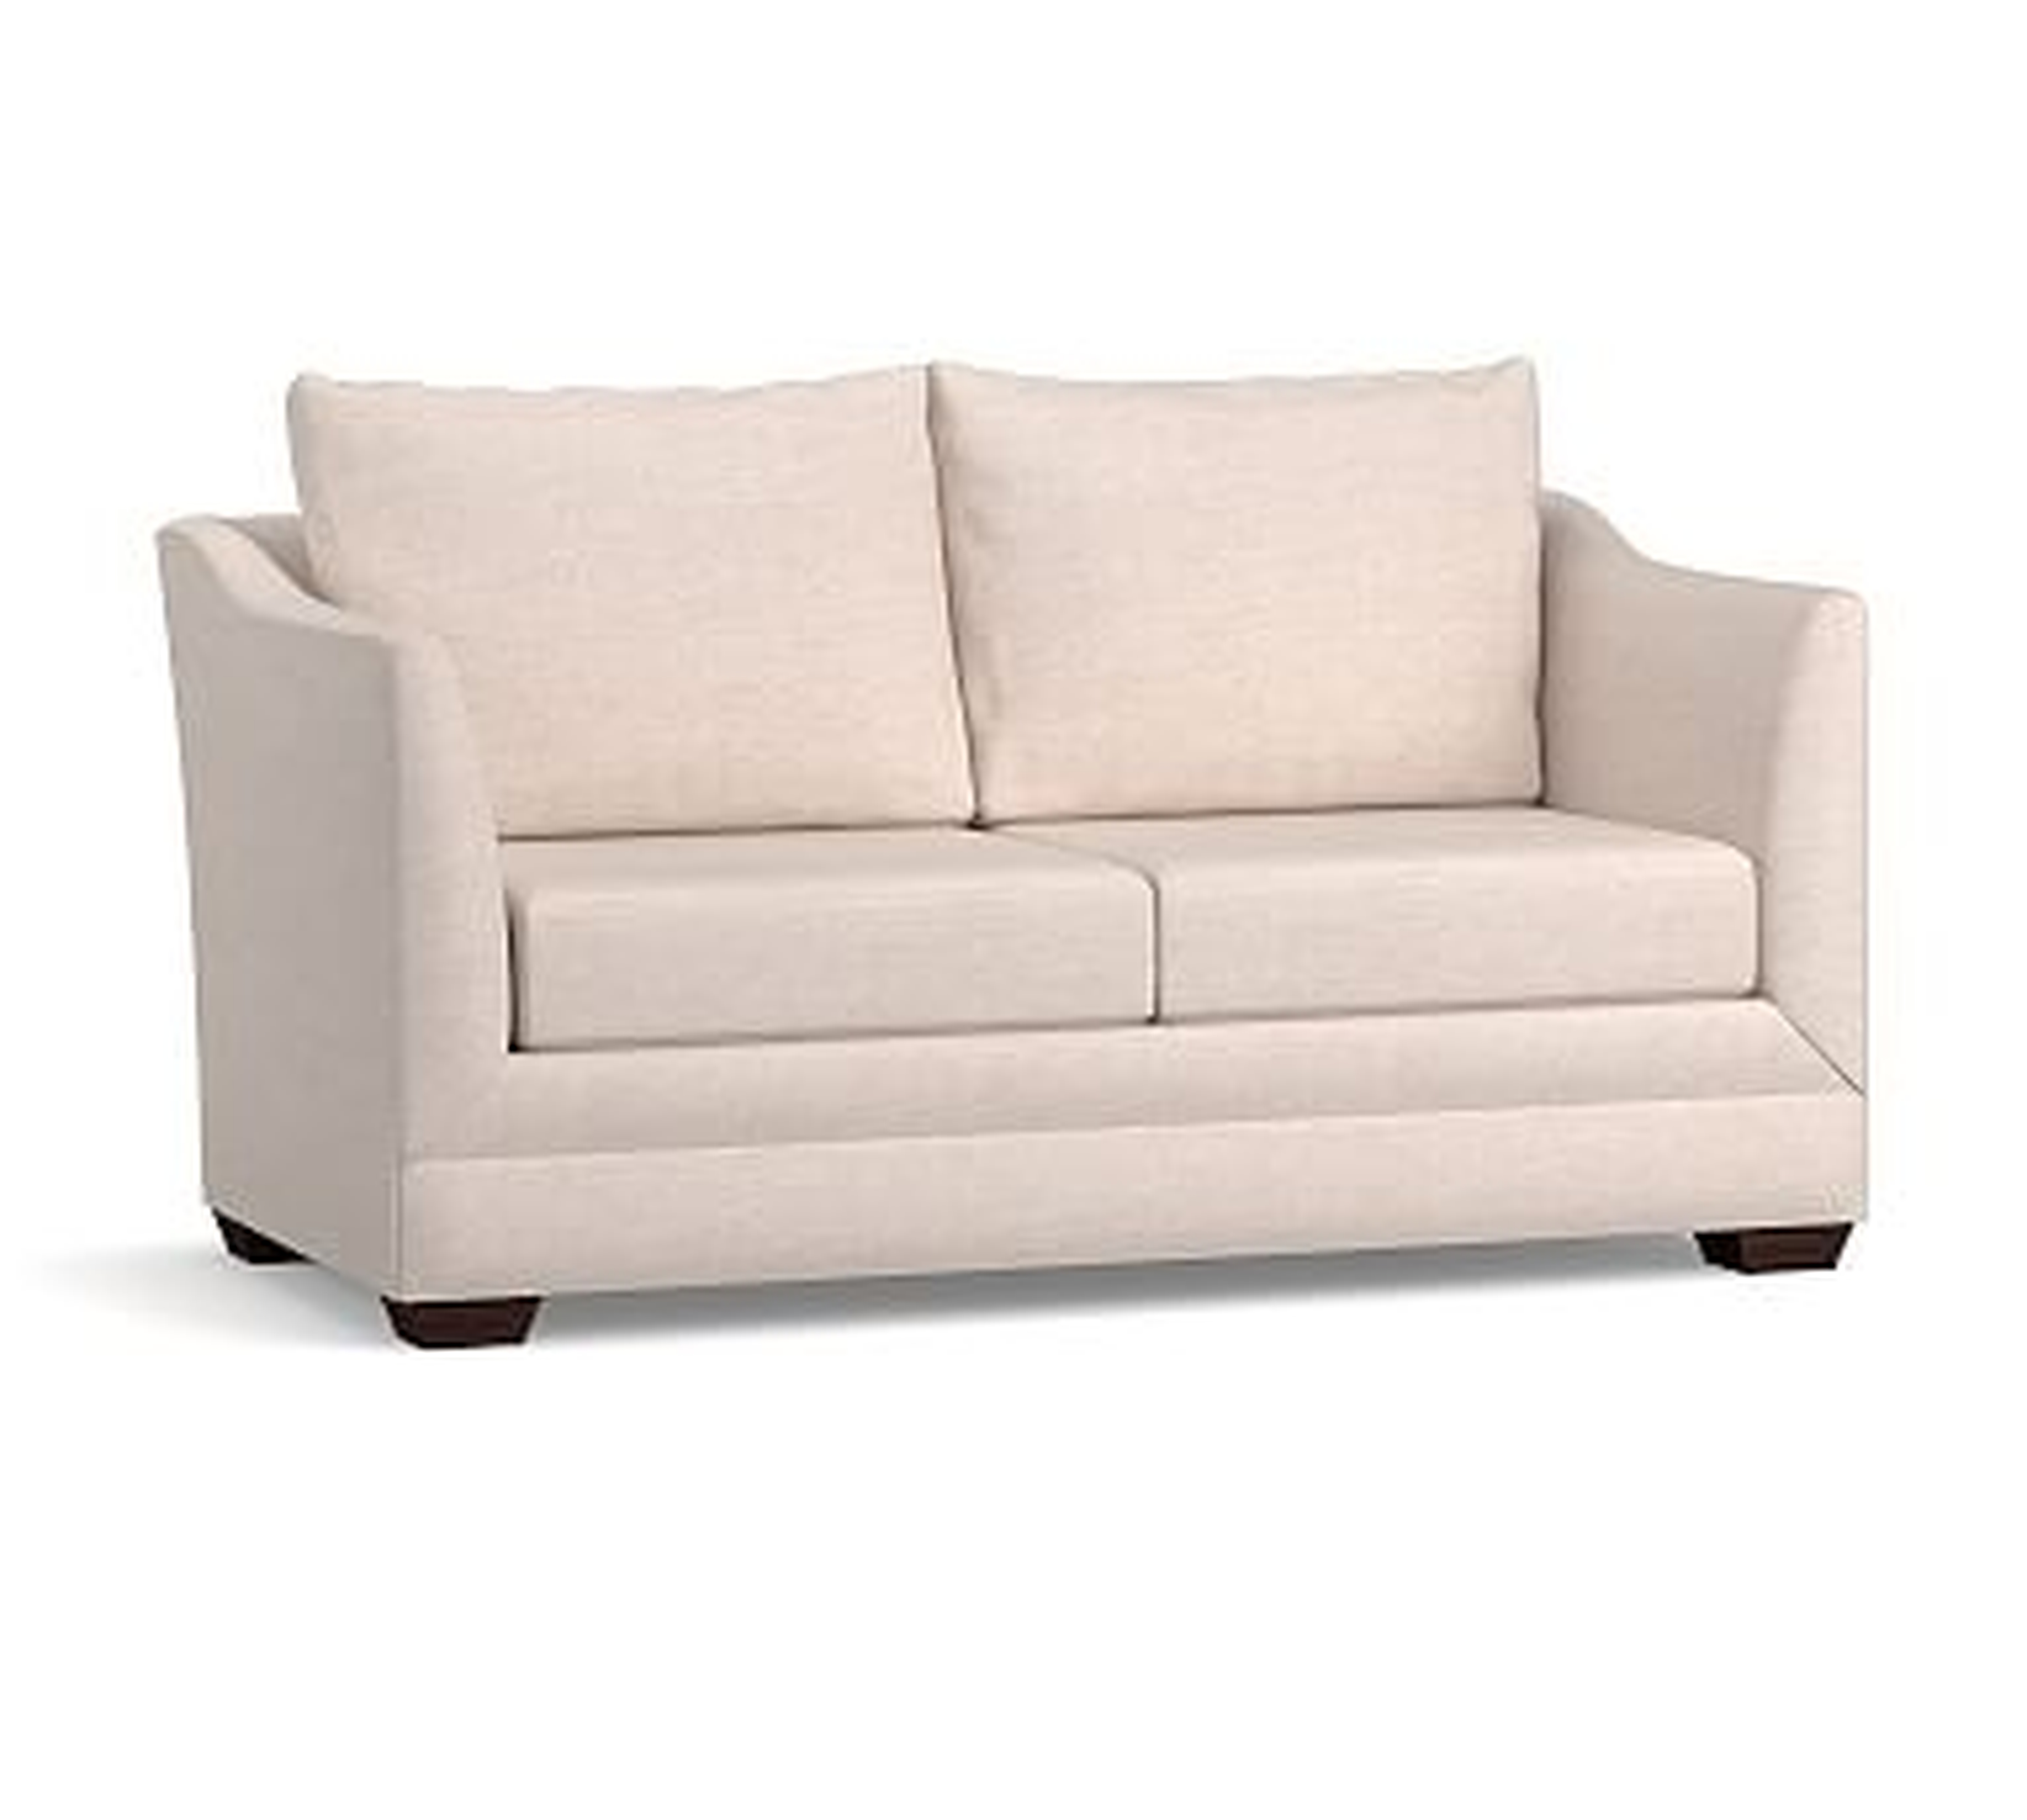 Celeste Upholstered Loveseat 66.5", Polyester Wrapped Cushions, Performance Brushed Basketweave Oatmeal - Pottery Barn